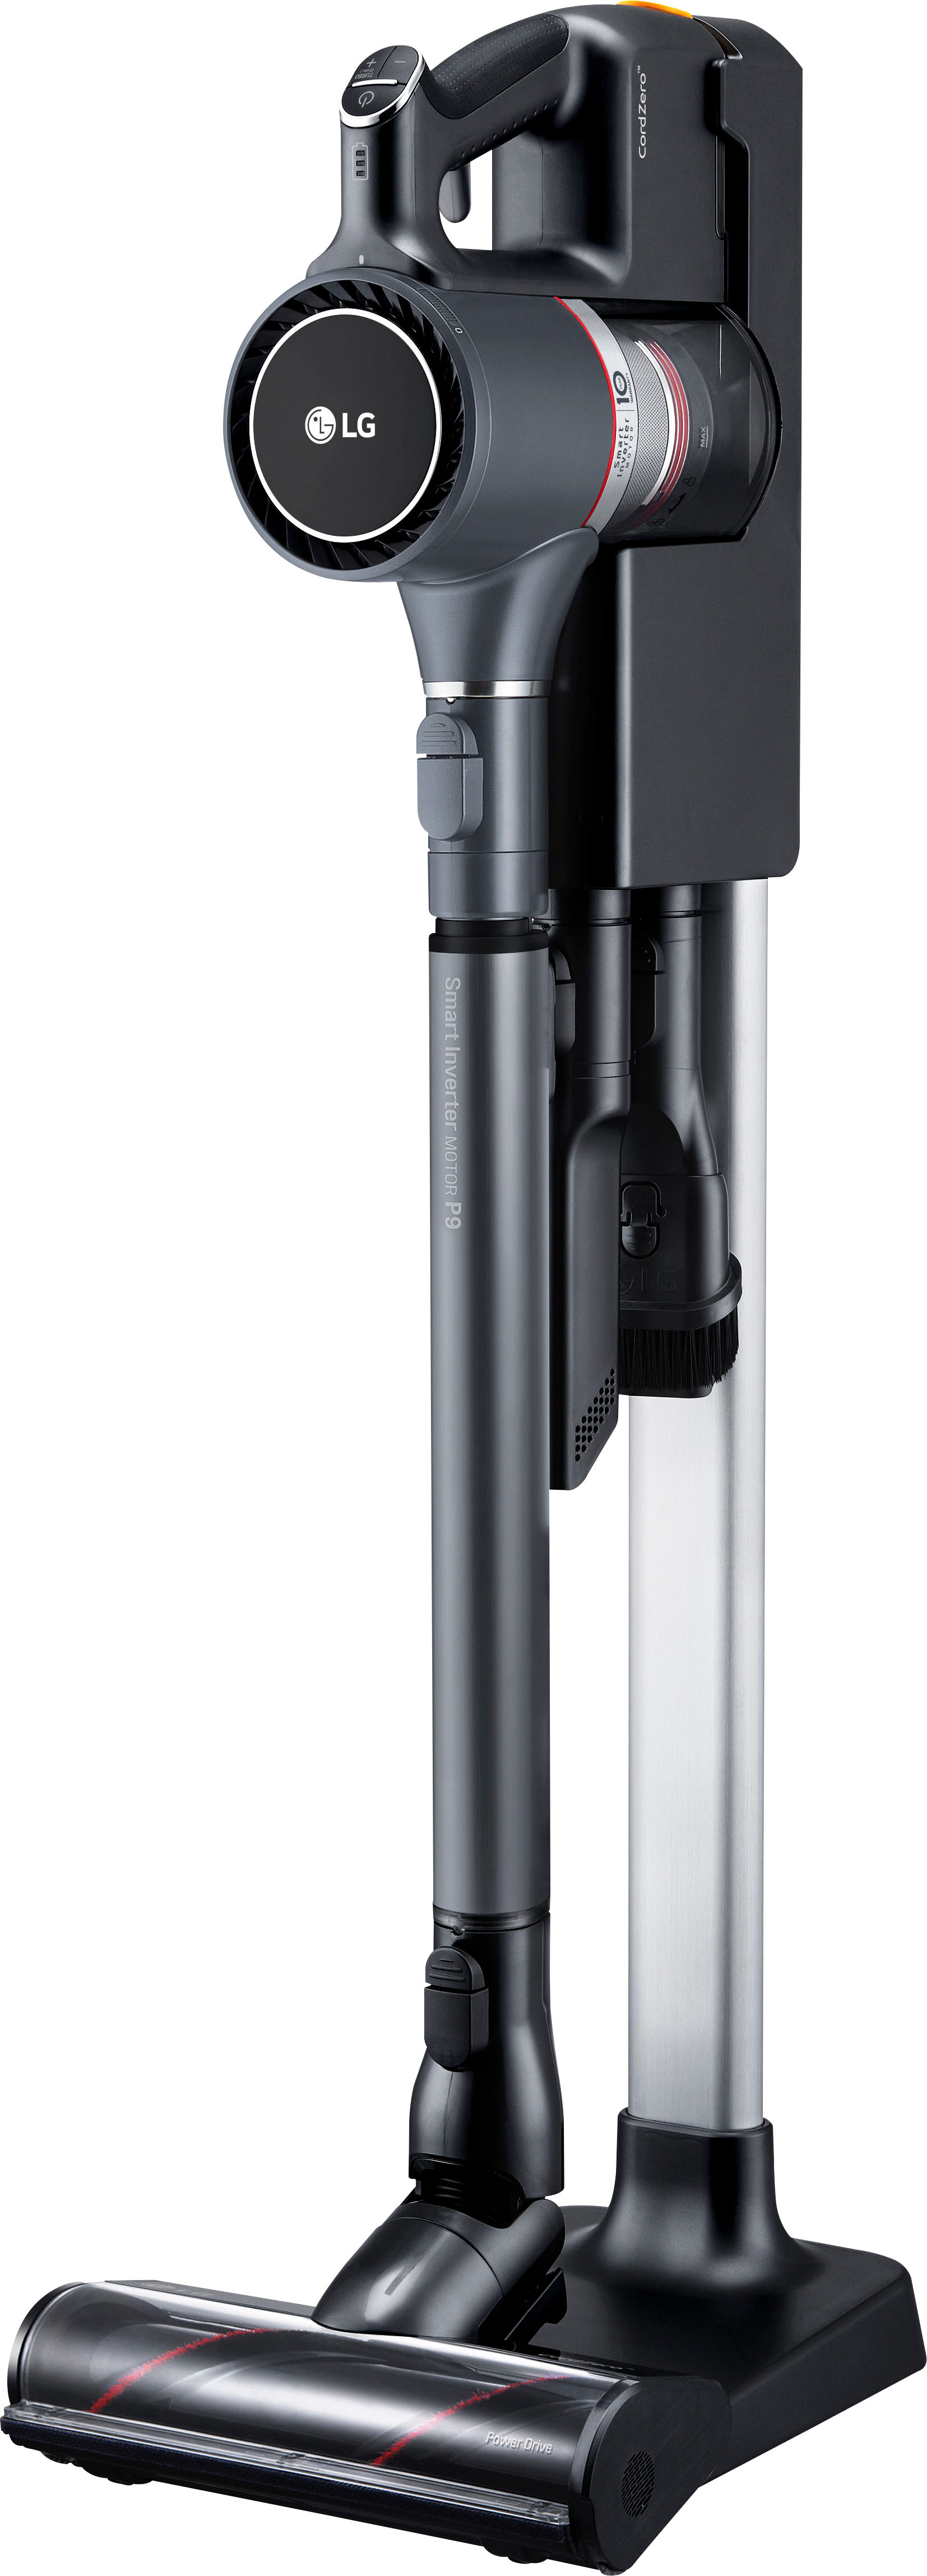 Angle View: LG - CordZero Cordless Stick Vacuum with 80-Minute Run Time, Floor and Punch Nozzles - Matte Gray